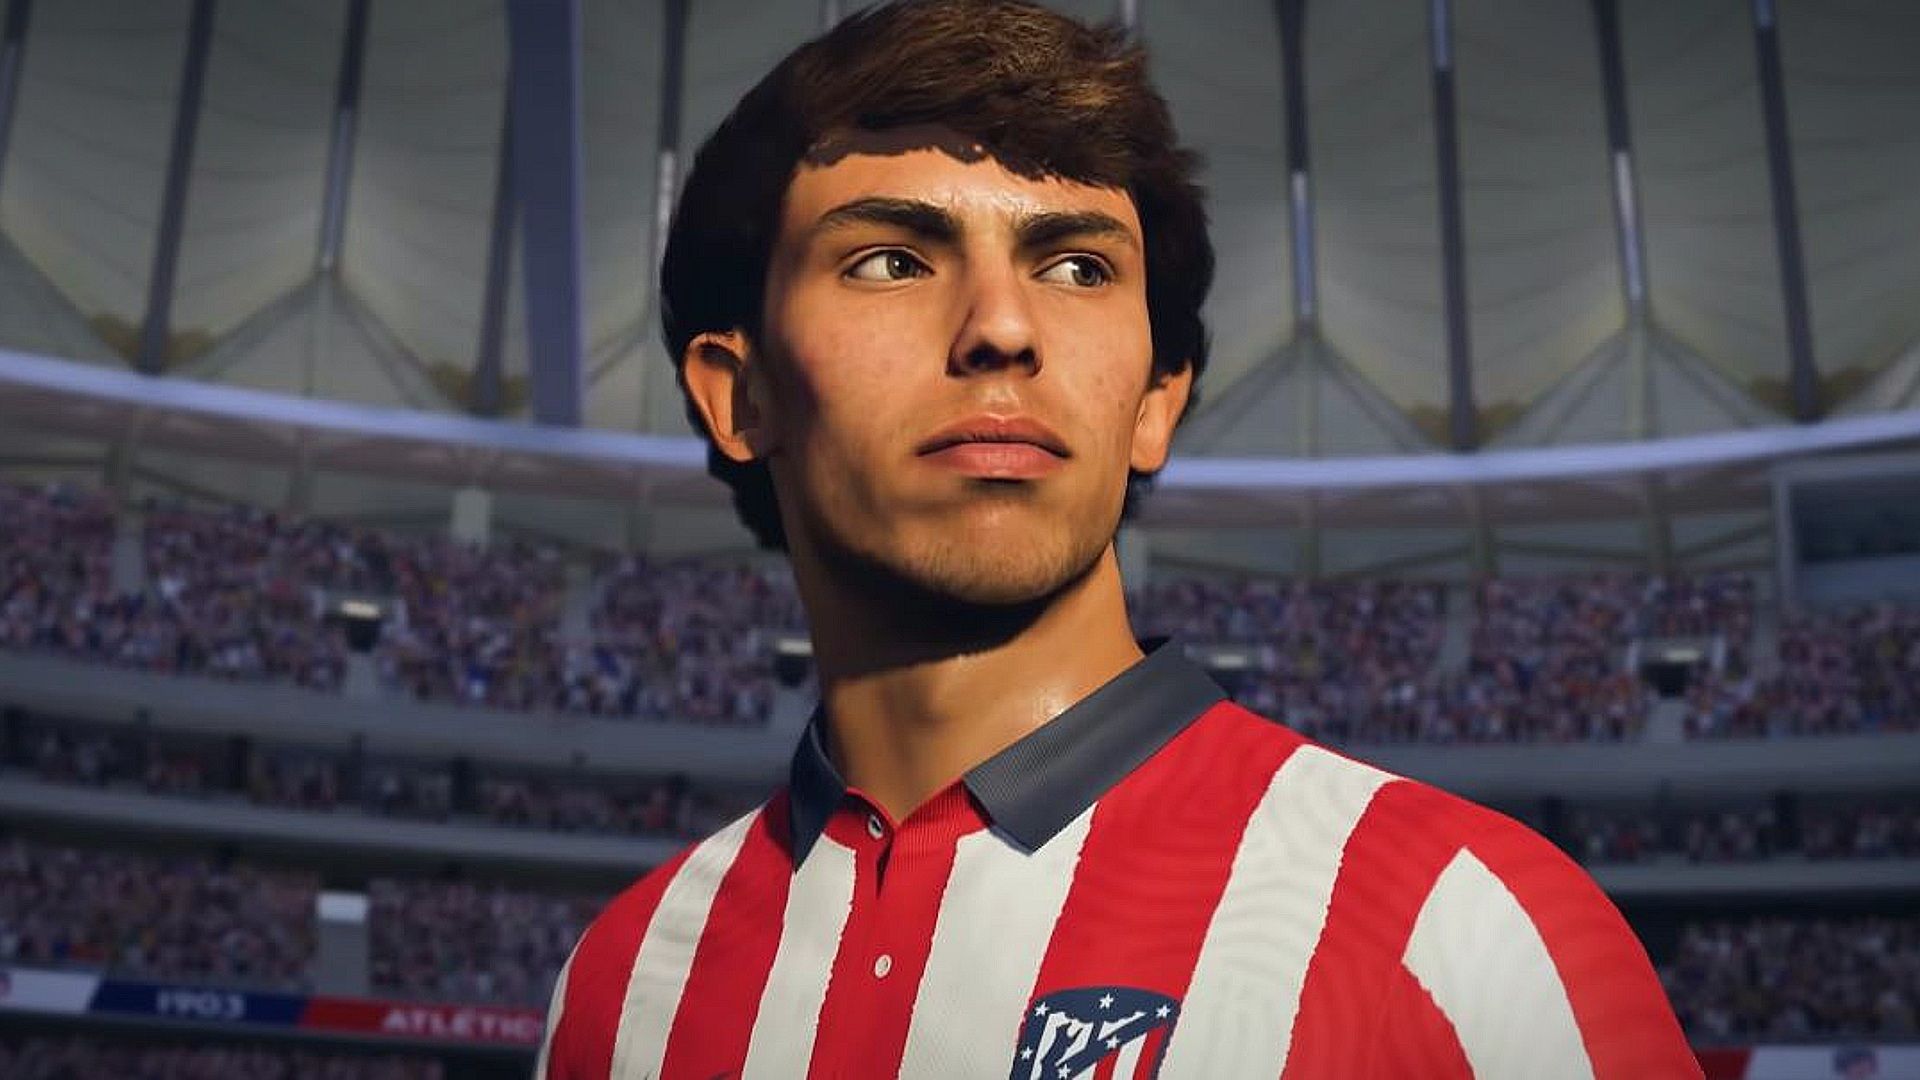 FIFA 21 Ultimate Team will have FUT Events and custom stadiums